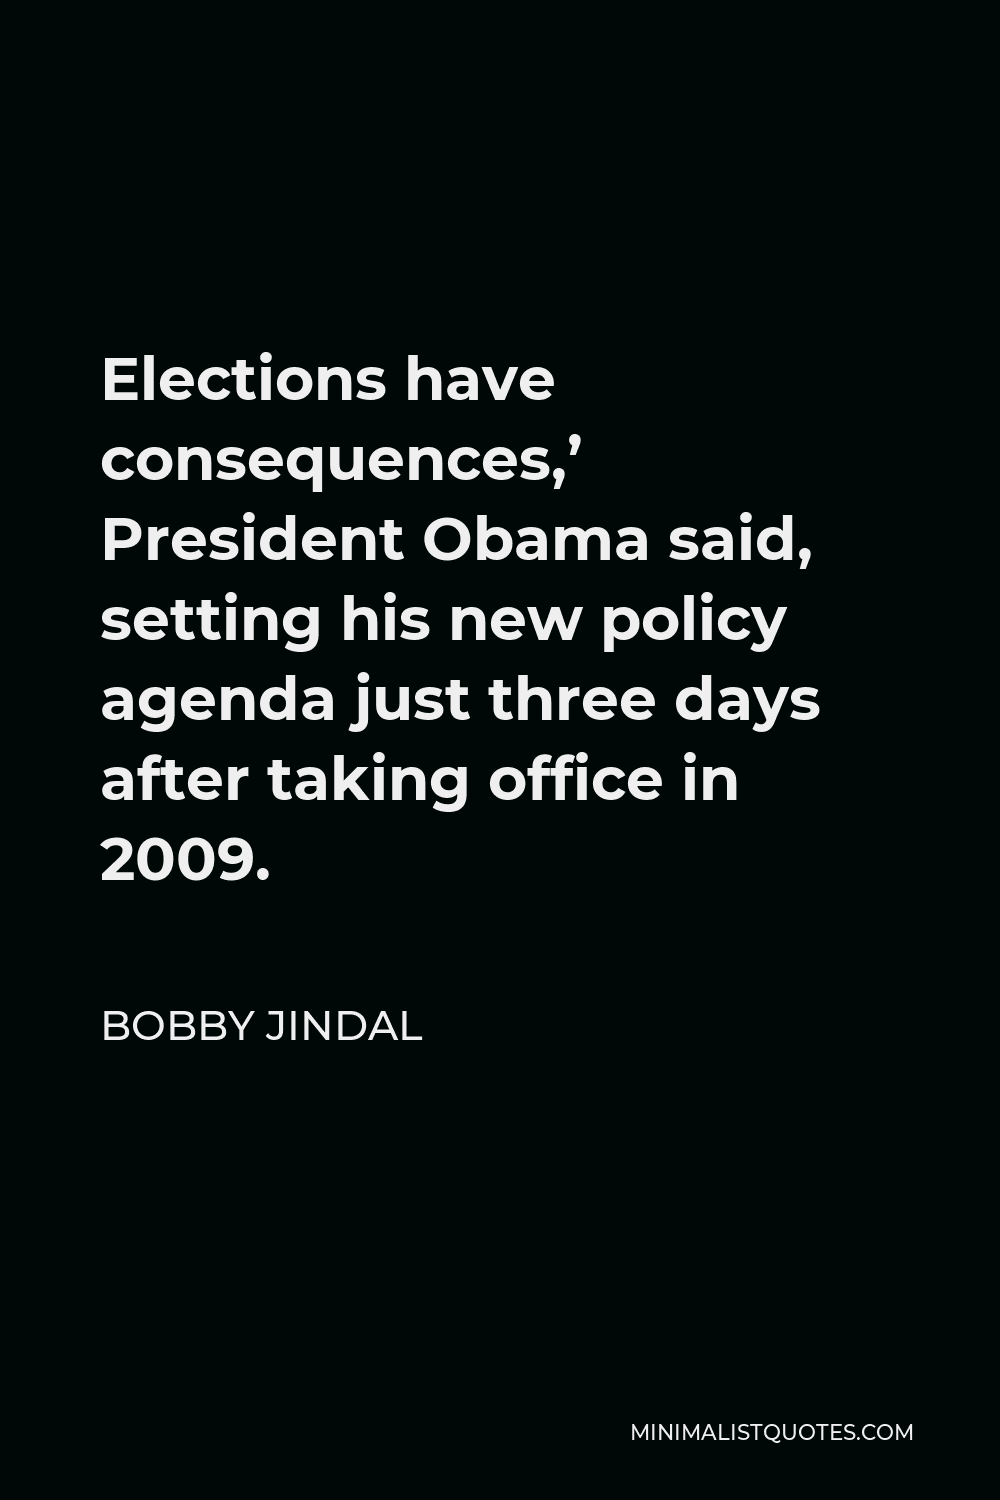 Bobby Jindal Quote - Elections have consequences,’ President Obama said, setting his new policy agenda just three days after taking office in 2009.